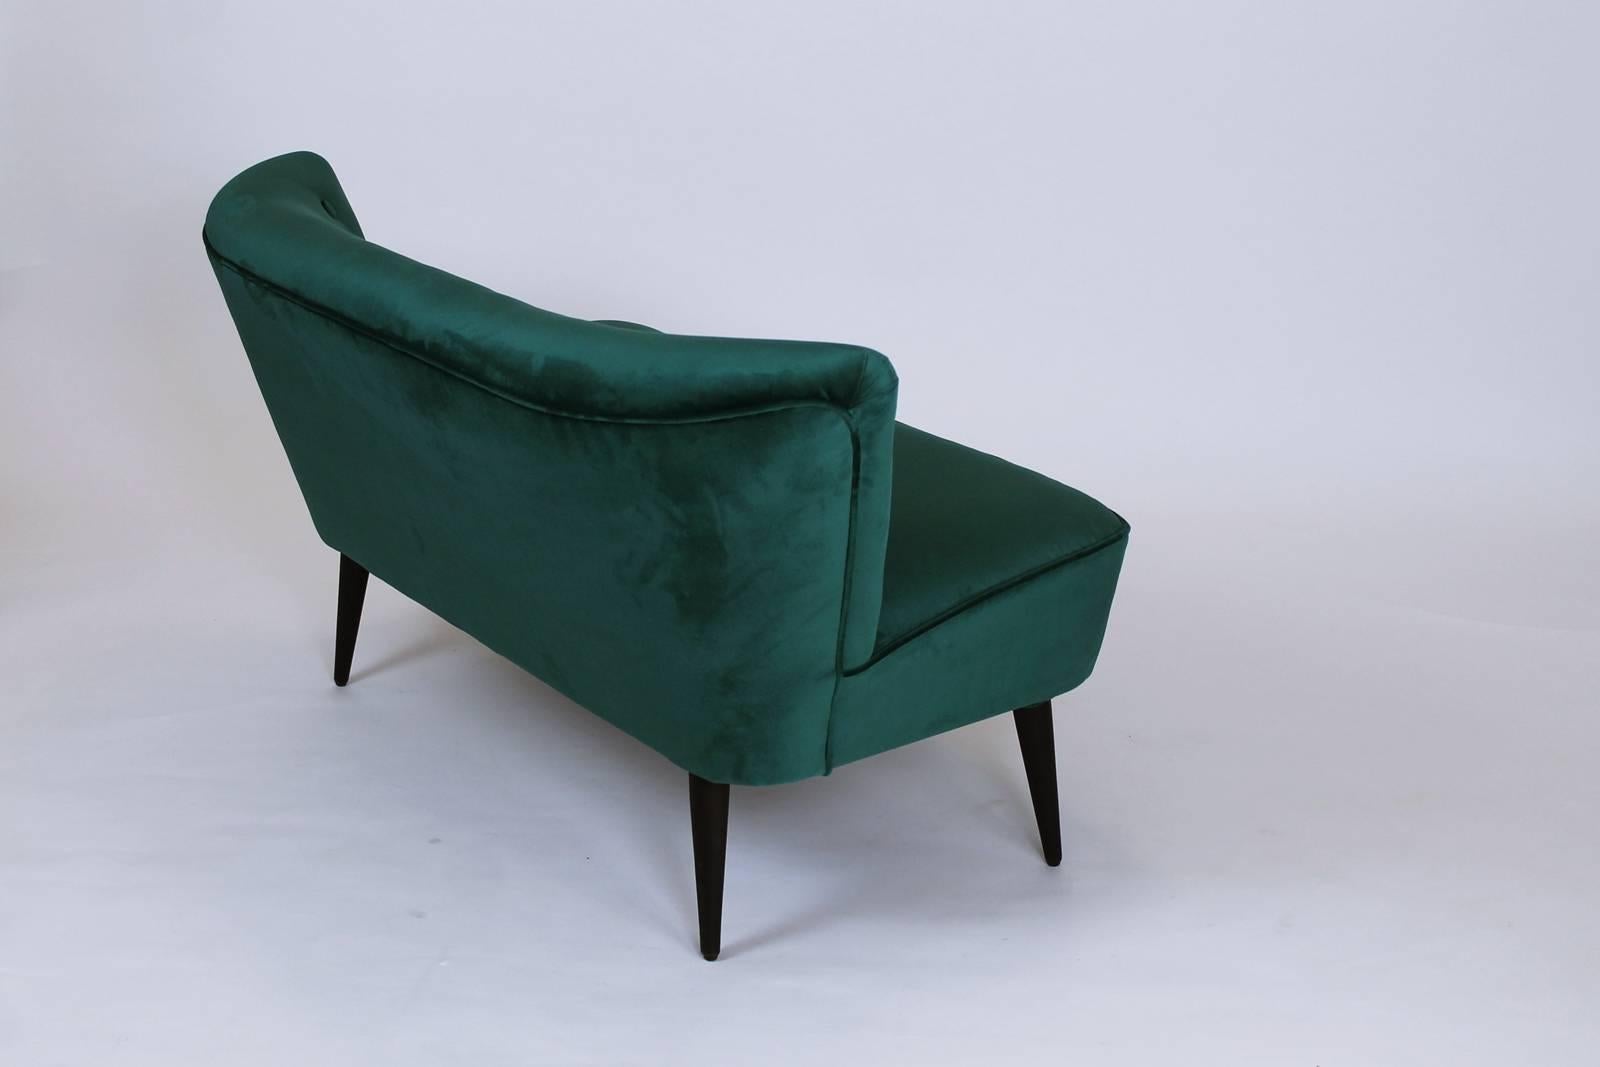 Mid-20th Century Hungarian Cocktail Sofa in Teal Velvet, 1960s For Sale